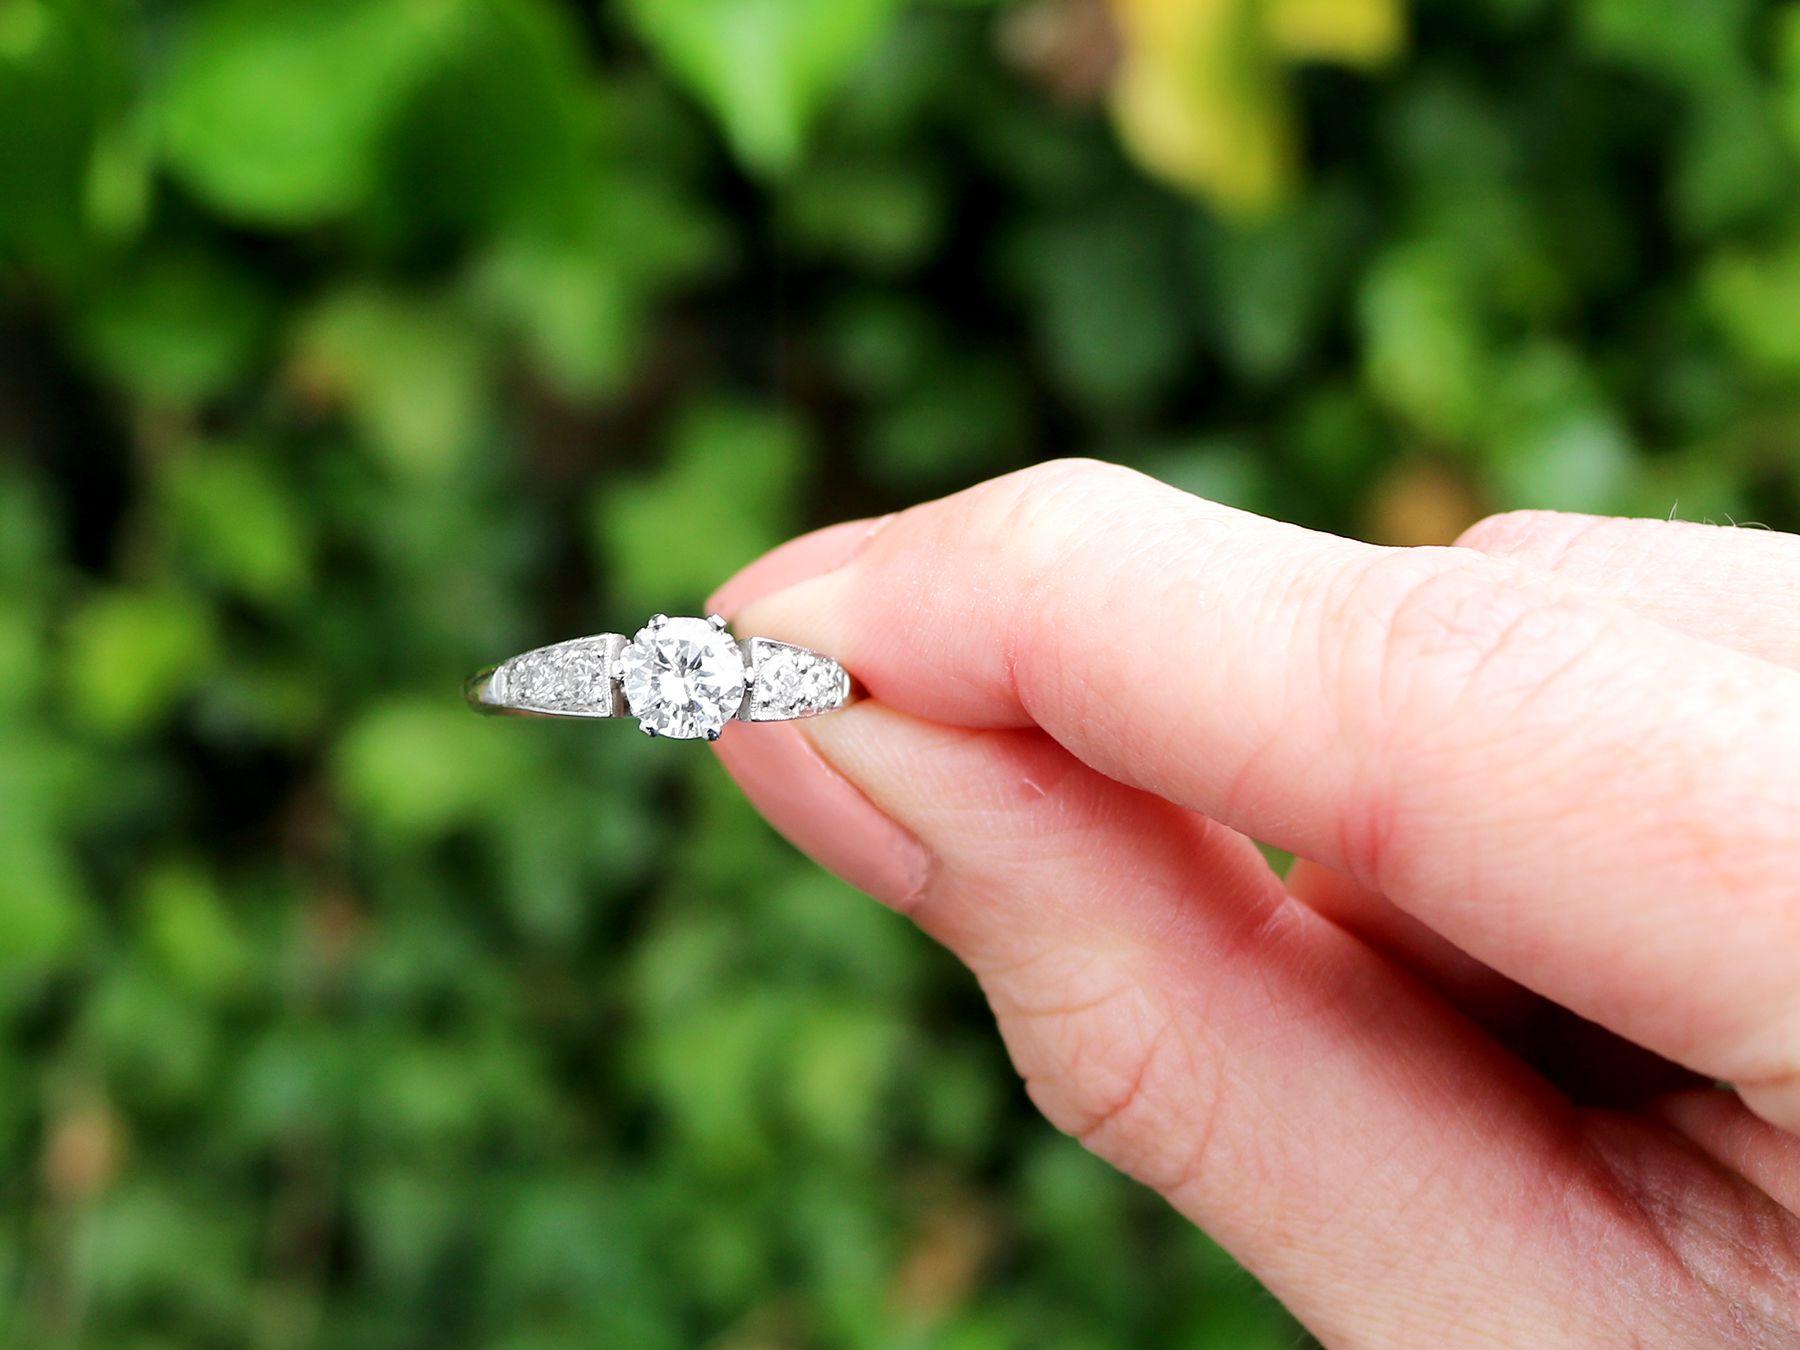 A stunning, fine and impressive 1.07 carat diamond and platinum solitaire engagement ring; part of our diverse jewellery and estate jewelry collections

This fine and impressive vintage diamond ring has been crafted in platinum.

The pierced